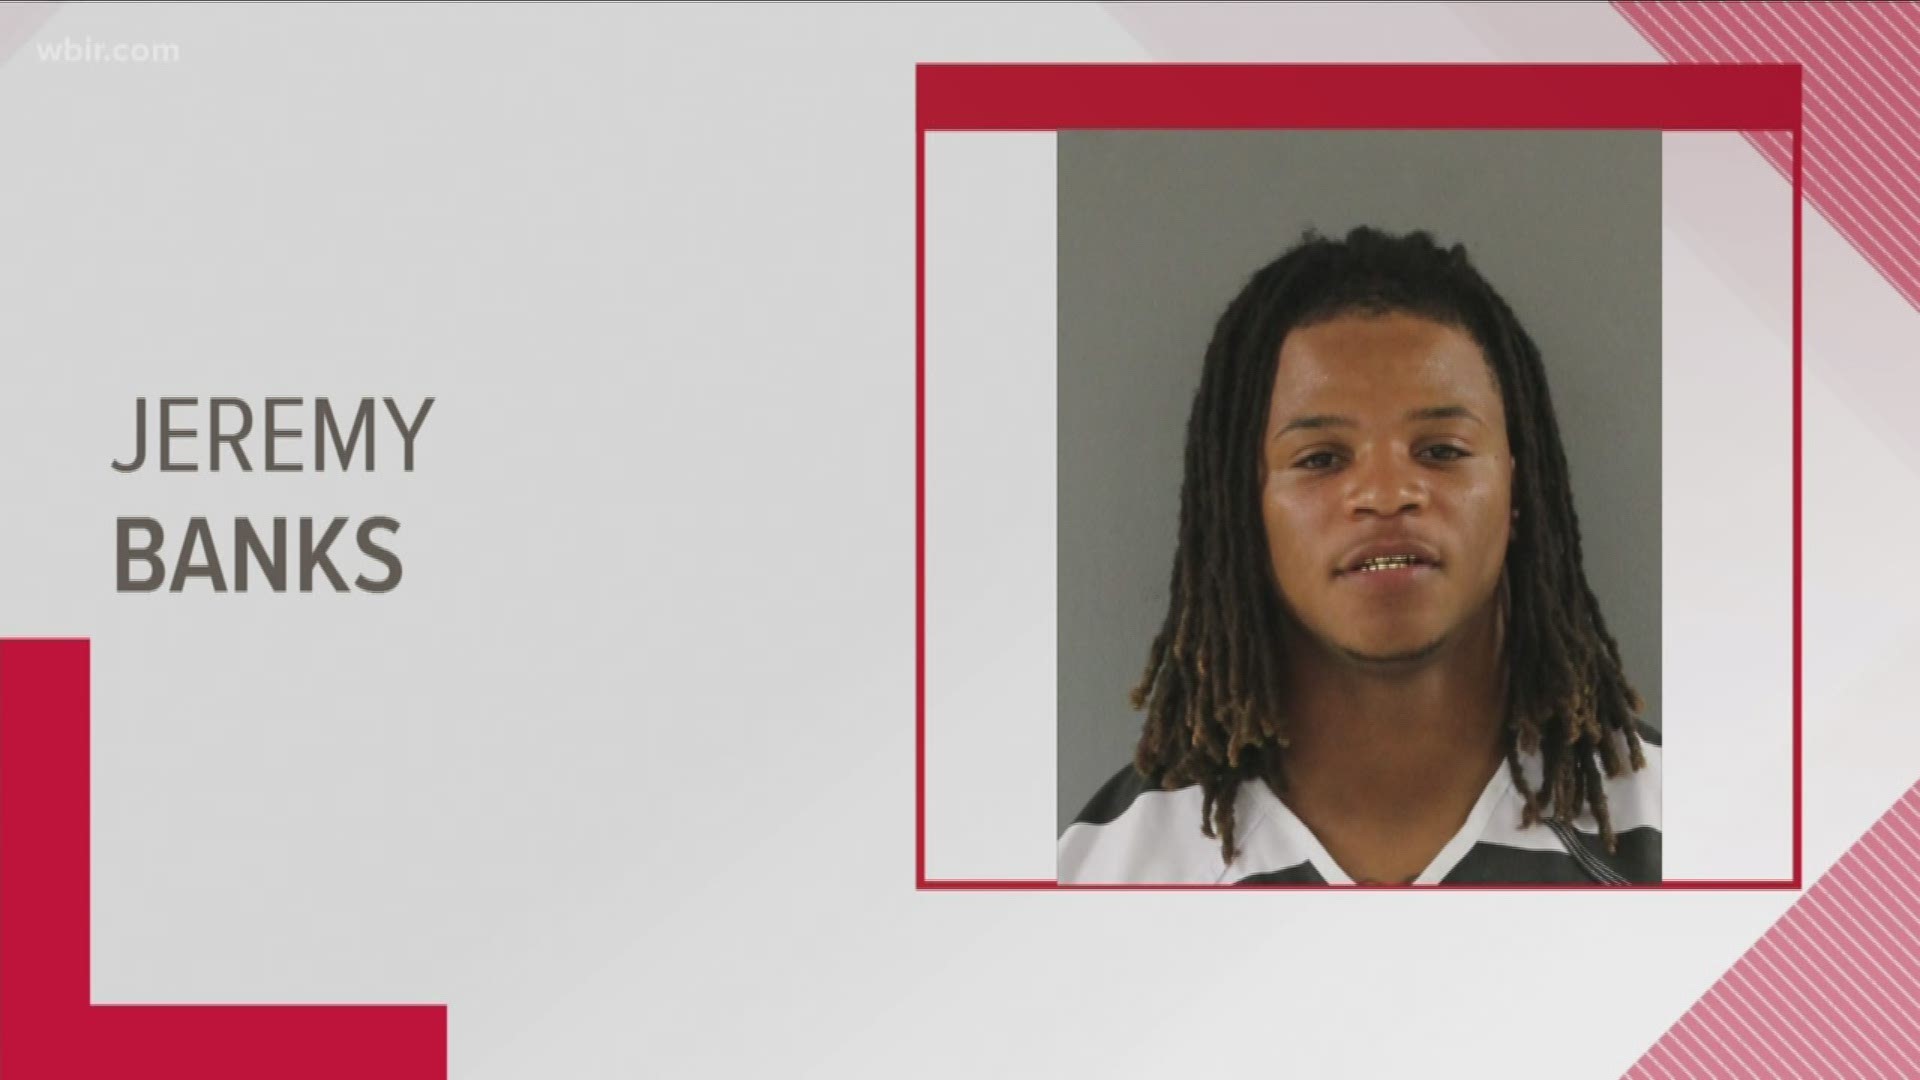 According to UT Police, football player Jeremy Banks was arrested this weekend near campus.